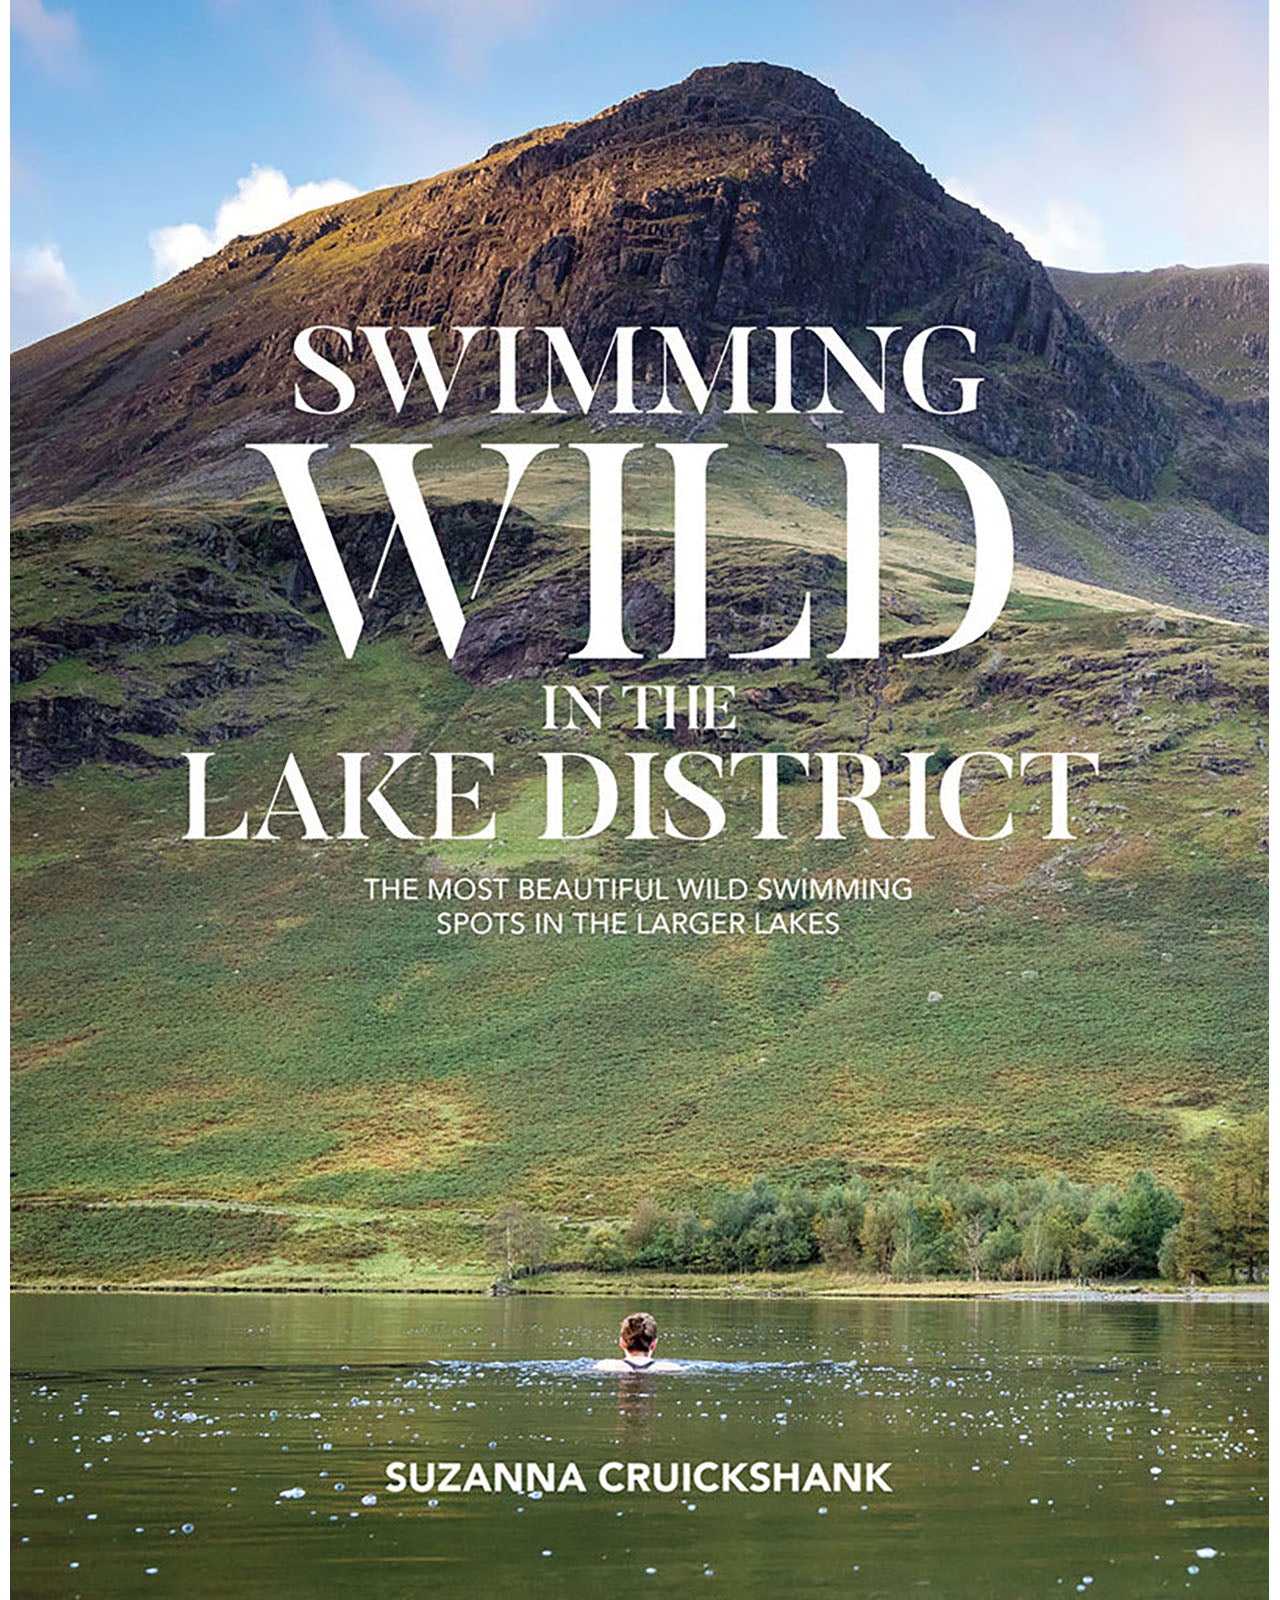 Swimming Wild In The Lake District by Suzanna Cruickshank